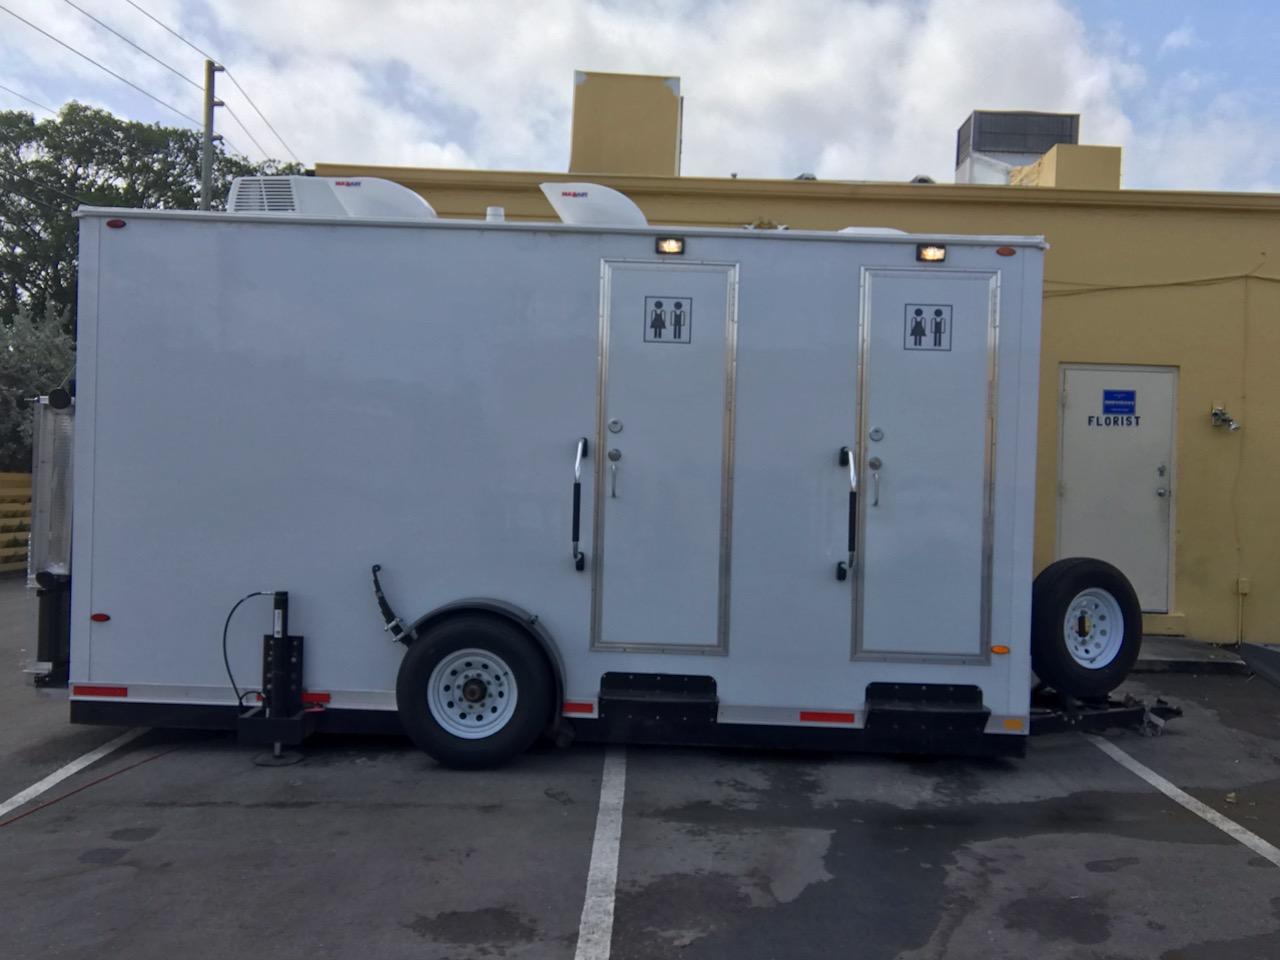 ADA Plus Two Station Vegas Restroom Trailer, at an Event, in Boca Raton FL 